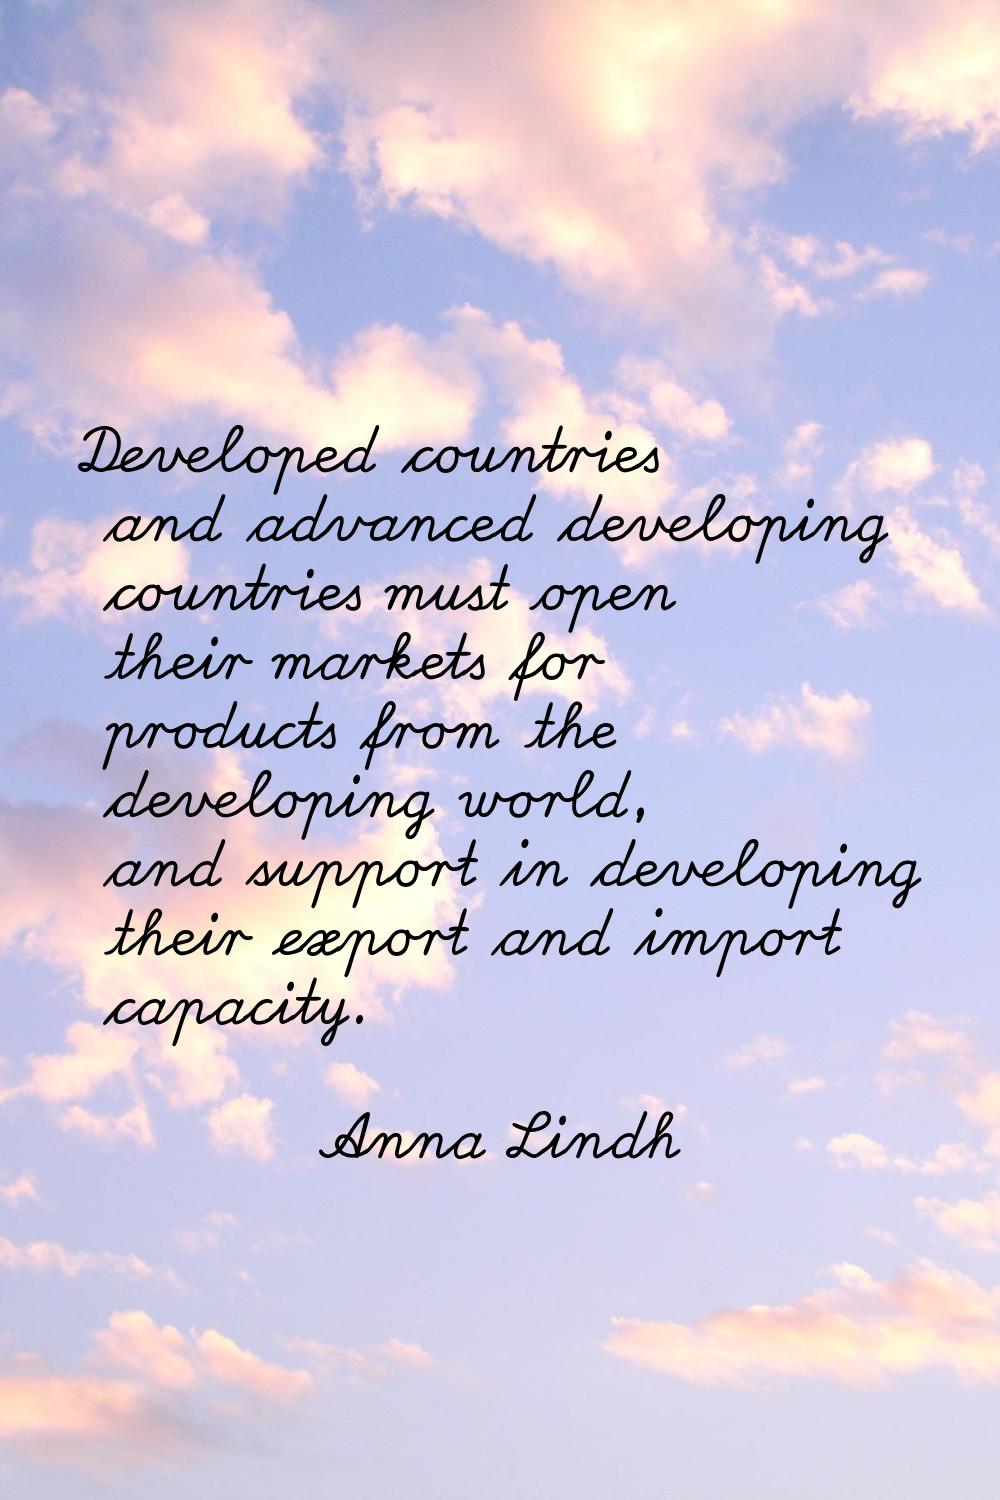 Developed countries and advanced developing countries must open their markets for products from the